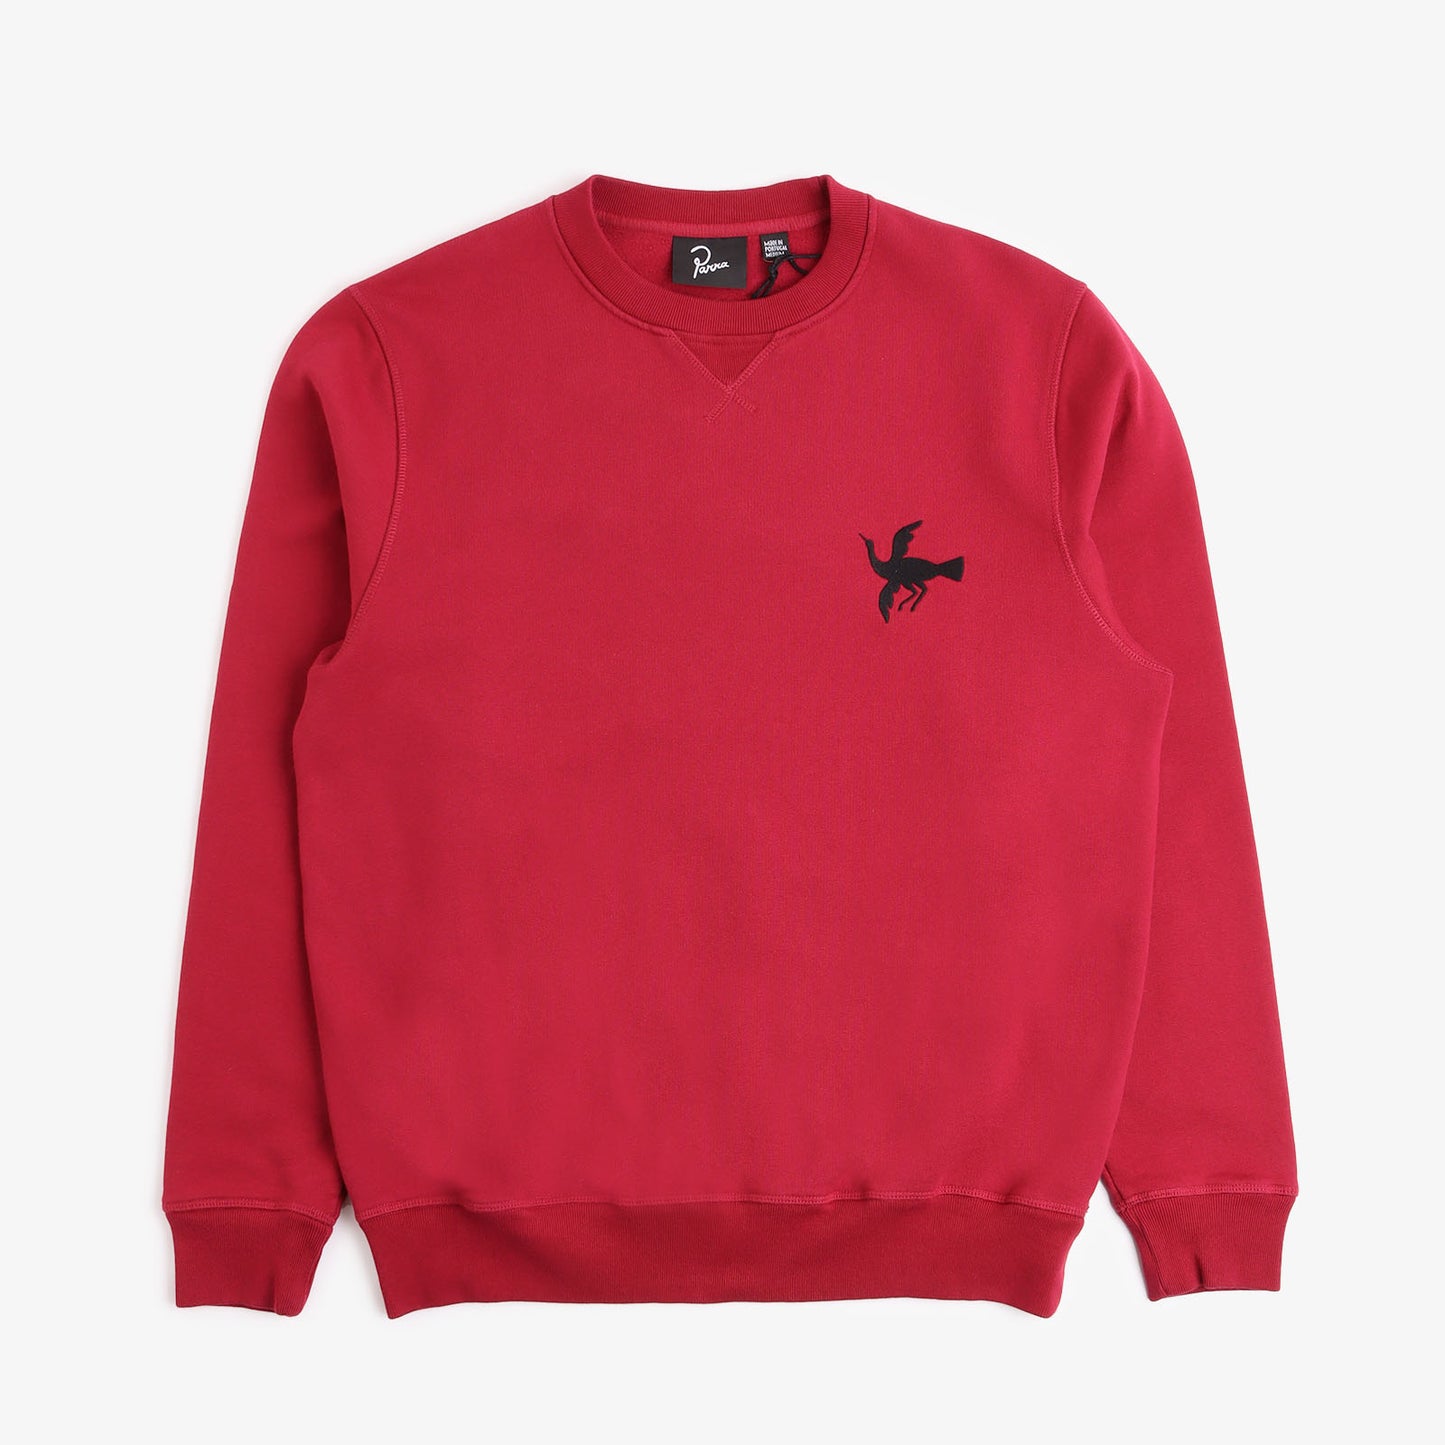 By Parra Snaked By A Horse Crew Neck Sweatshirt